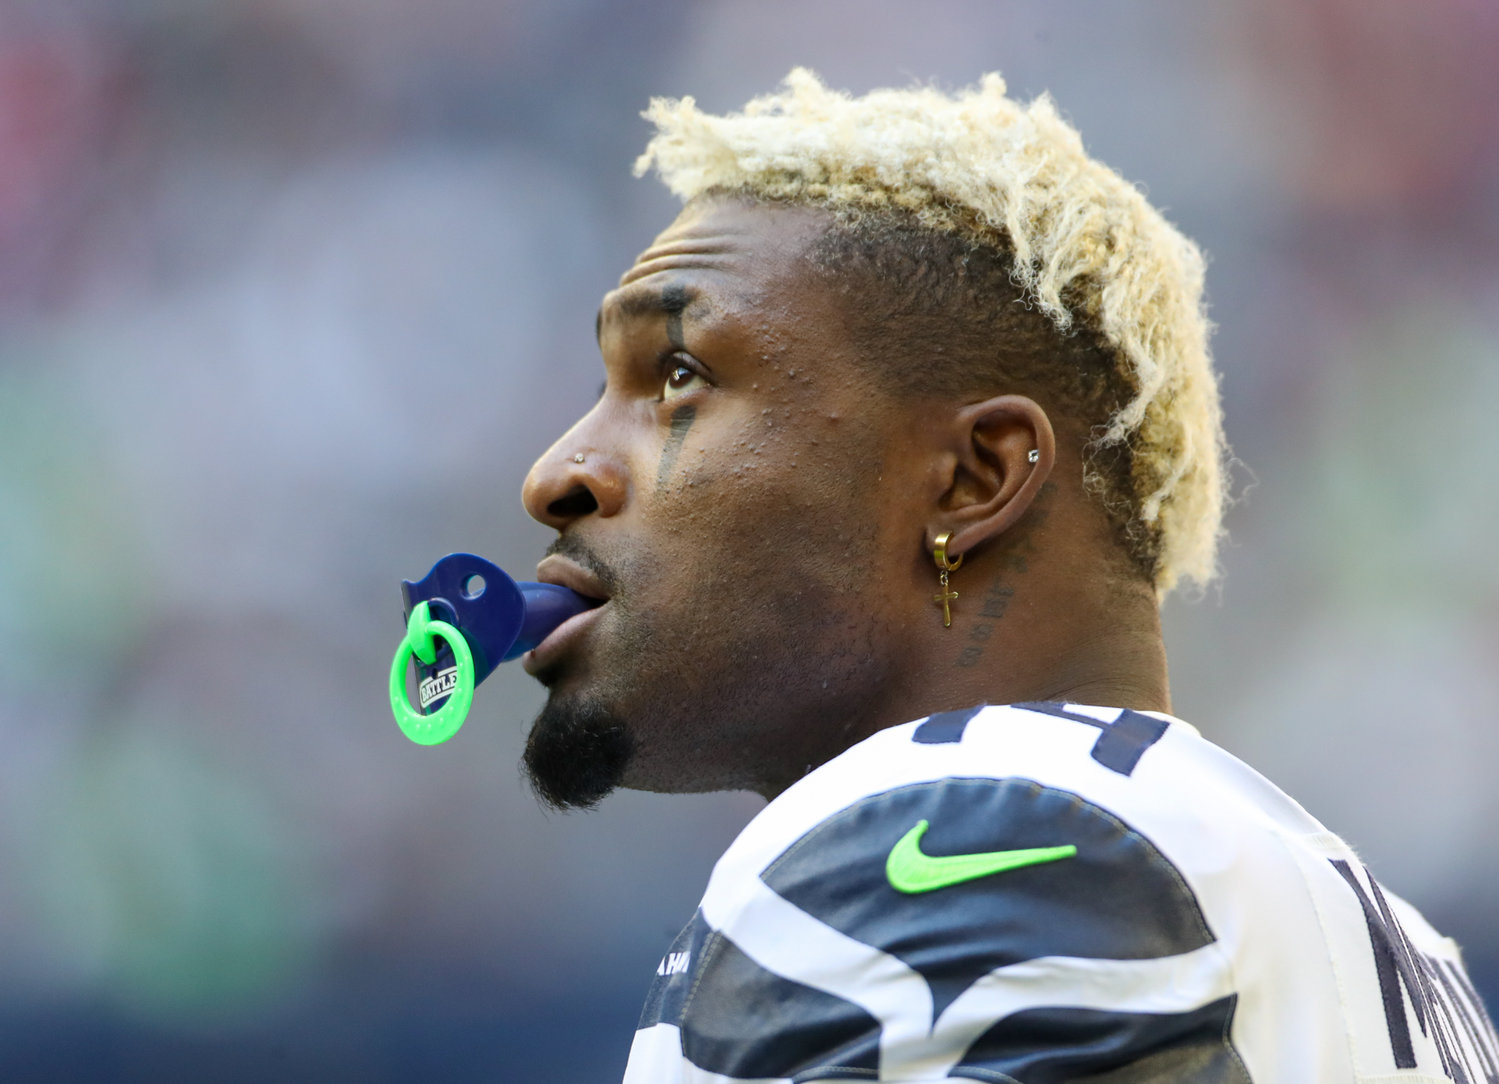 Seattle Seahawks wide receiver DK Metcalf (14) looks up at the video board during the second half of an NFL game between the Seahawks and the Texans on December 12, 2021 in Houston, Texas.